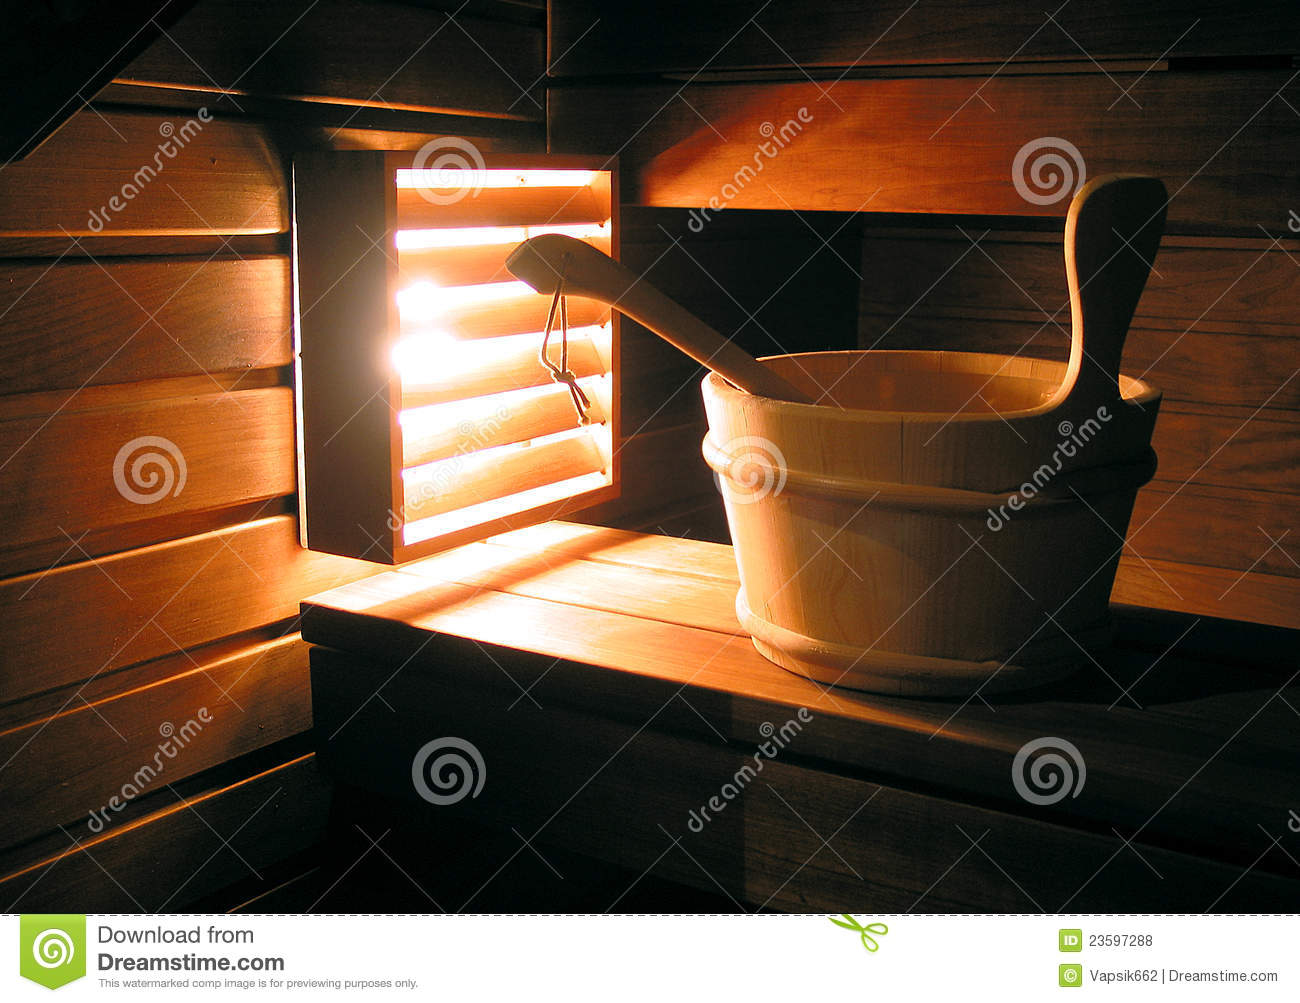 Steam Room Royalty Free Stock Photos   Image  23597288